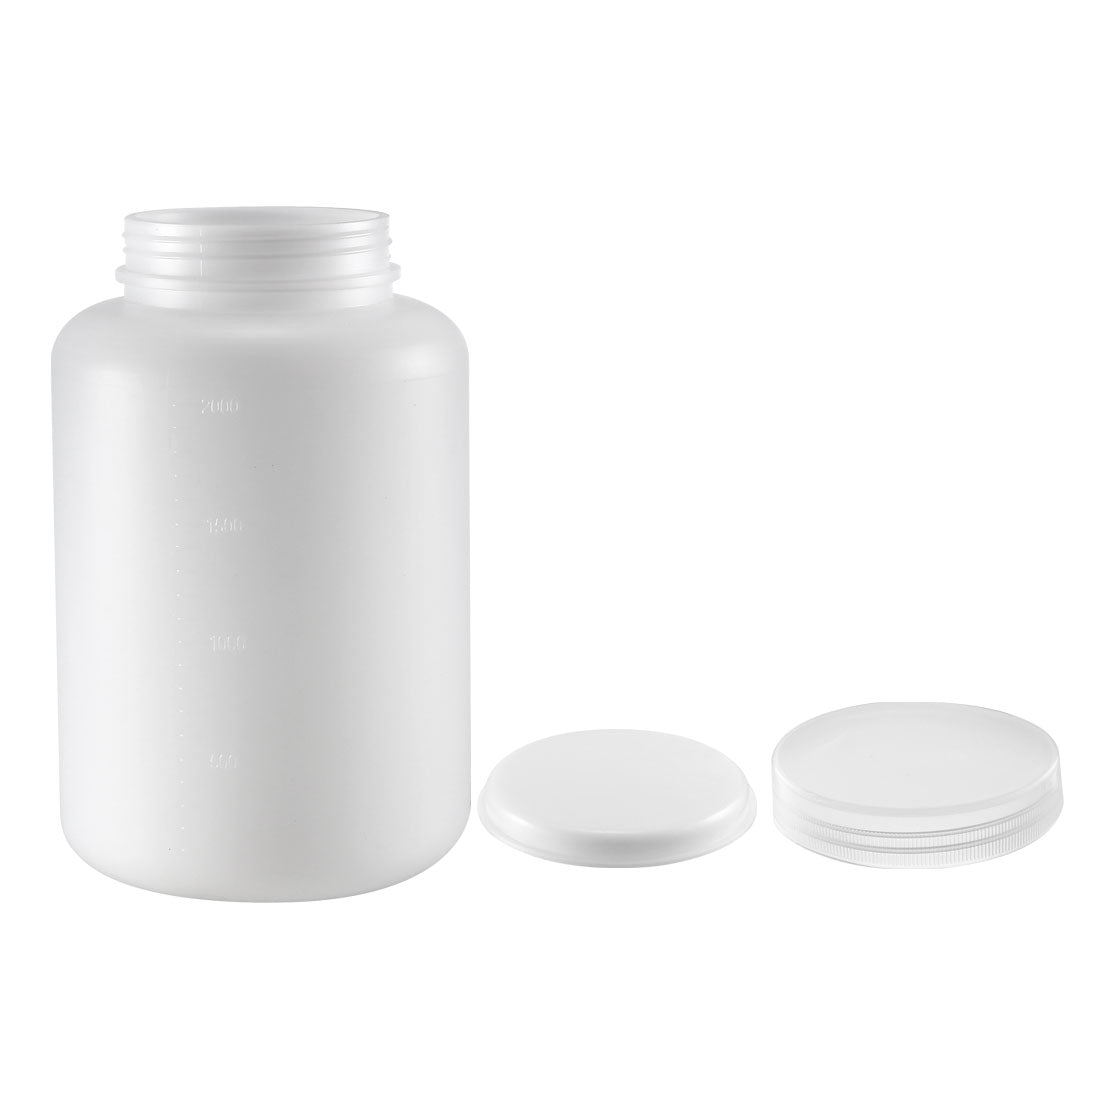 Uxcell Uxcell Plastic Lab Chemical Reagent Bottle 150ml/5oz Wide Mouth Sample Sealing Liquid Storage Container